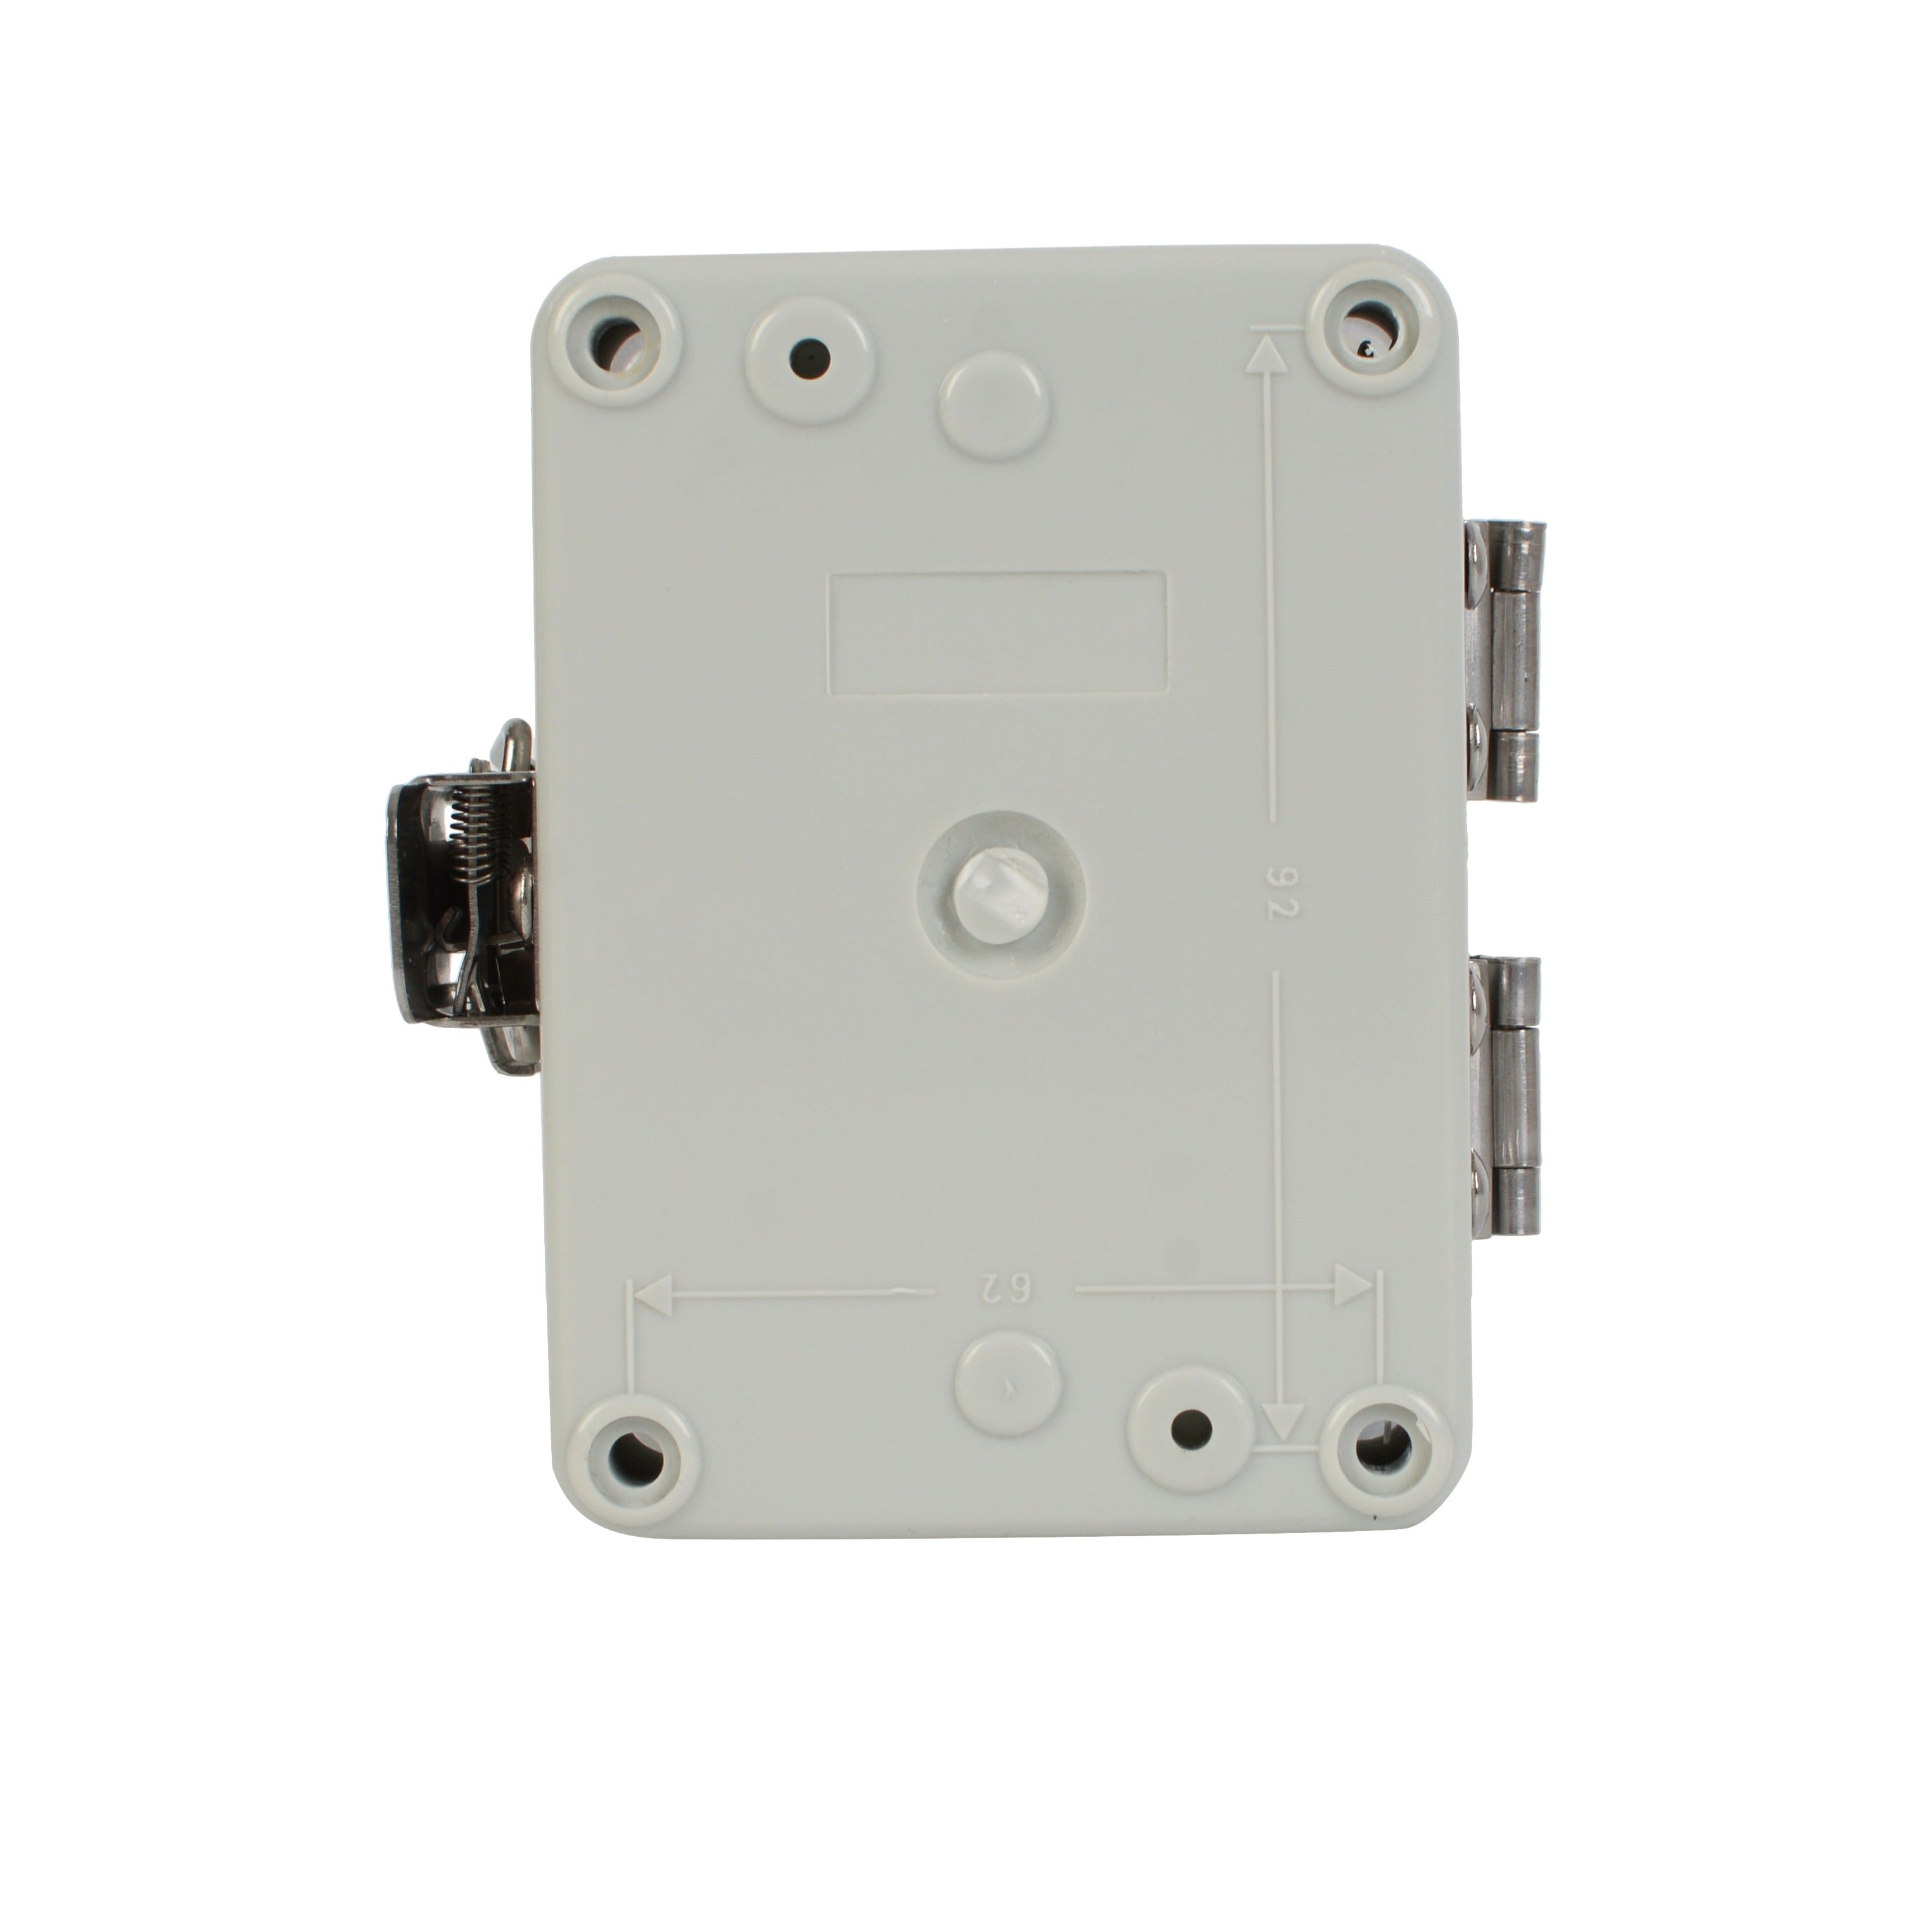 ABS IP66 Clear Lid Junction Box 80 x 110 x 85mm